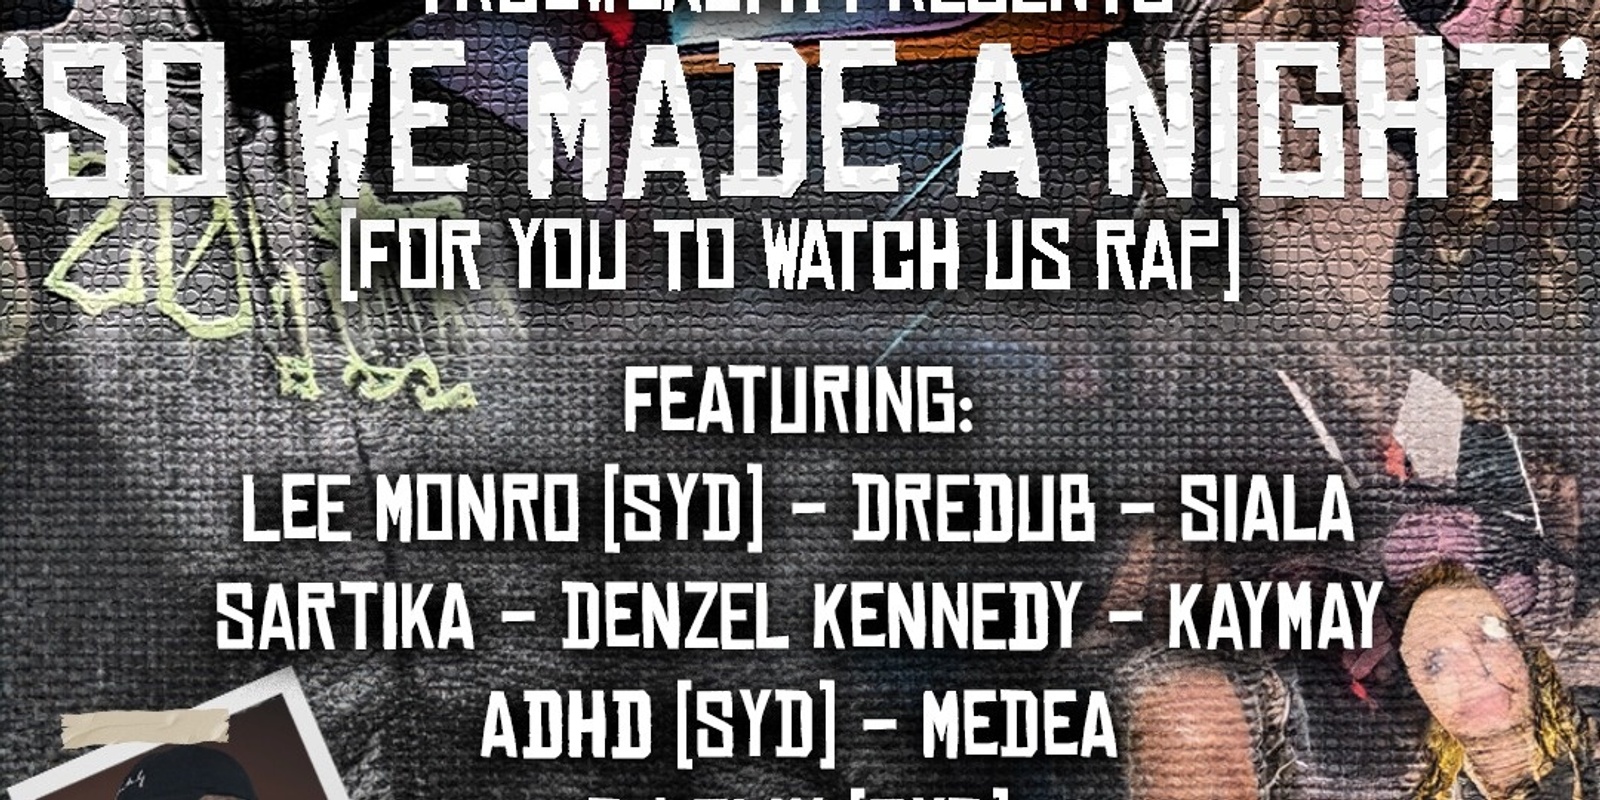 Banner image for True Wealth presents "So we made a night..." (for you to watch us rap)